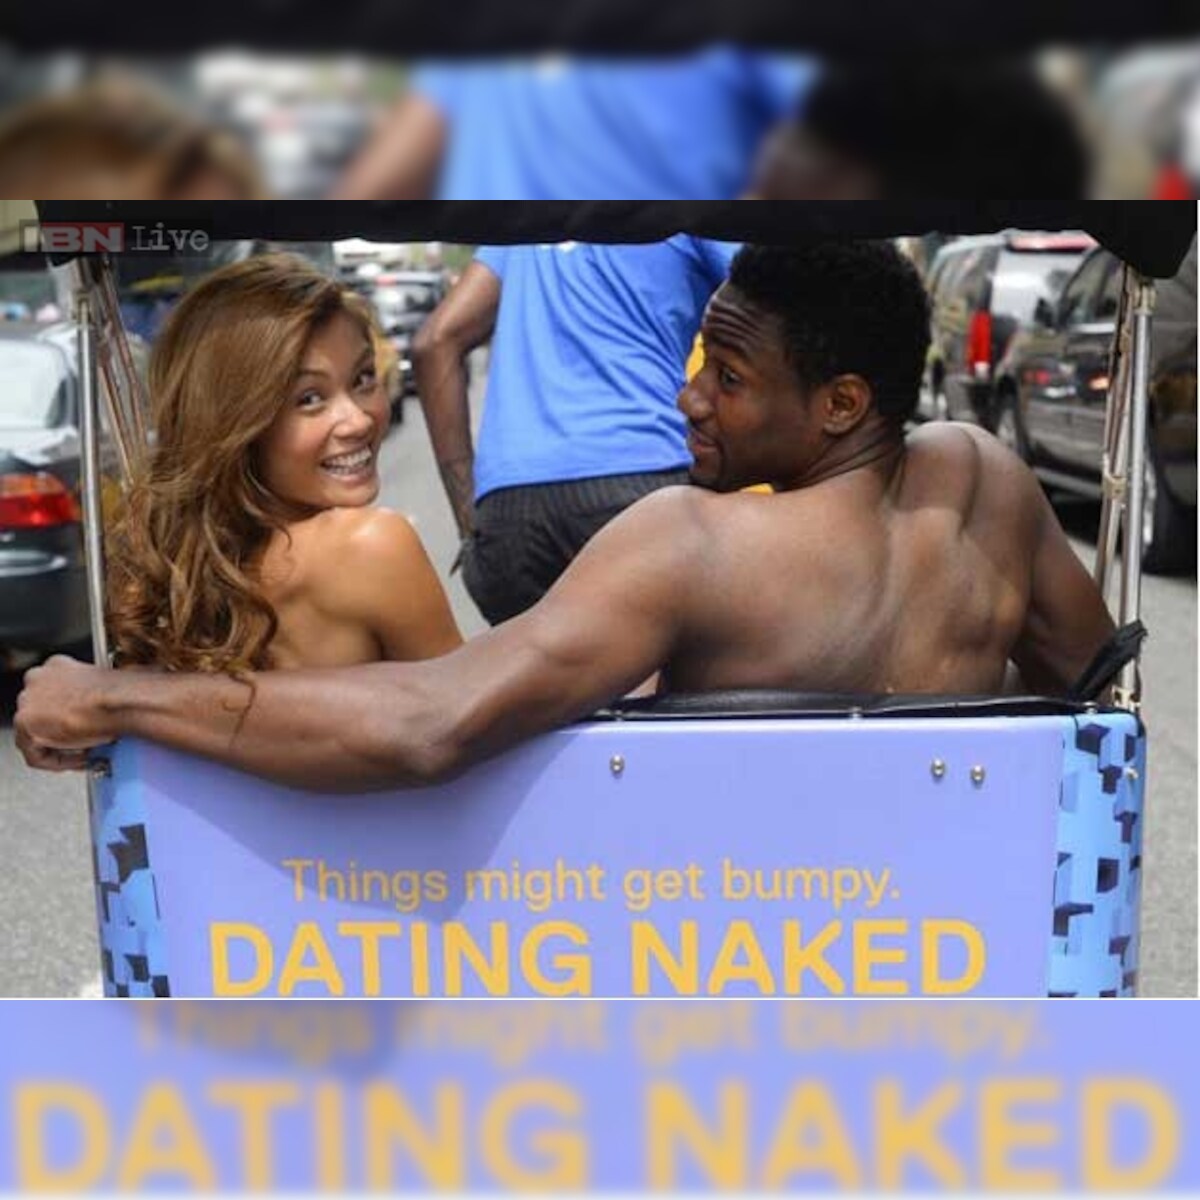 Dating naked